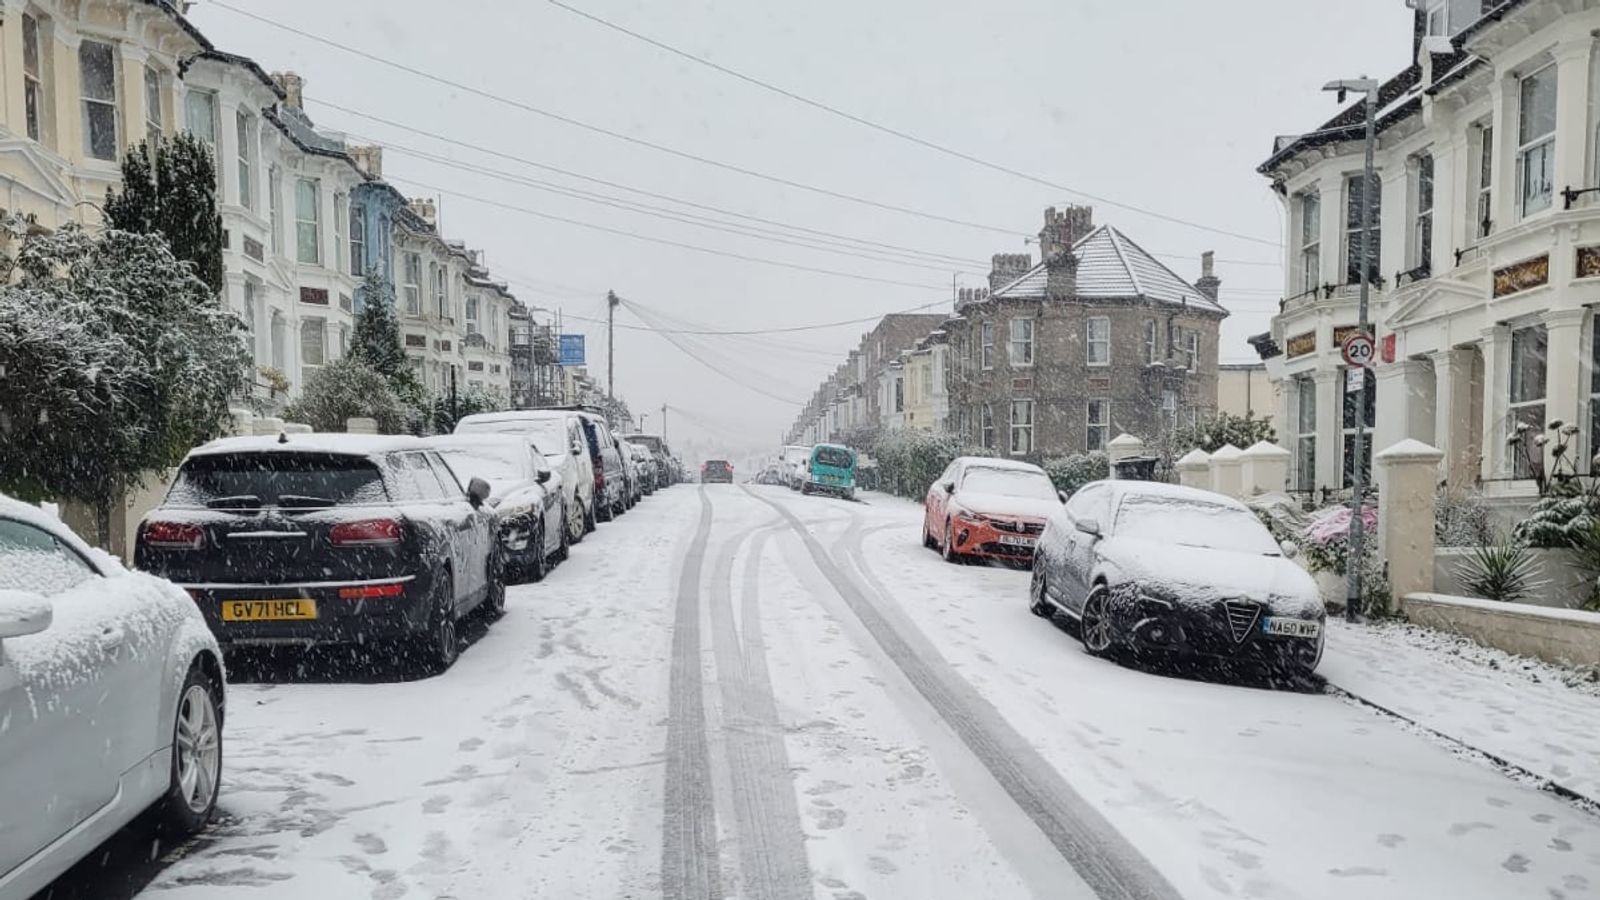 UK weather: More snow, ice and freezing fog set to cause Monday morning rush-hour chaos